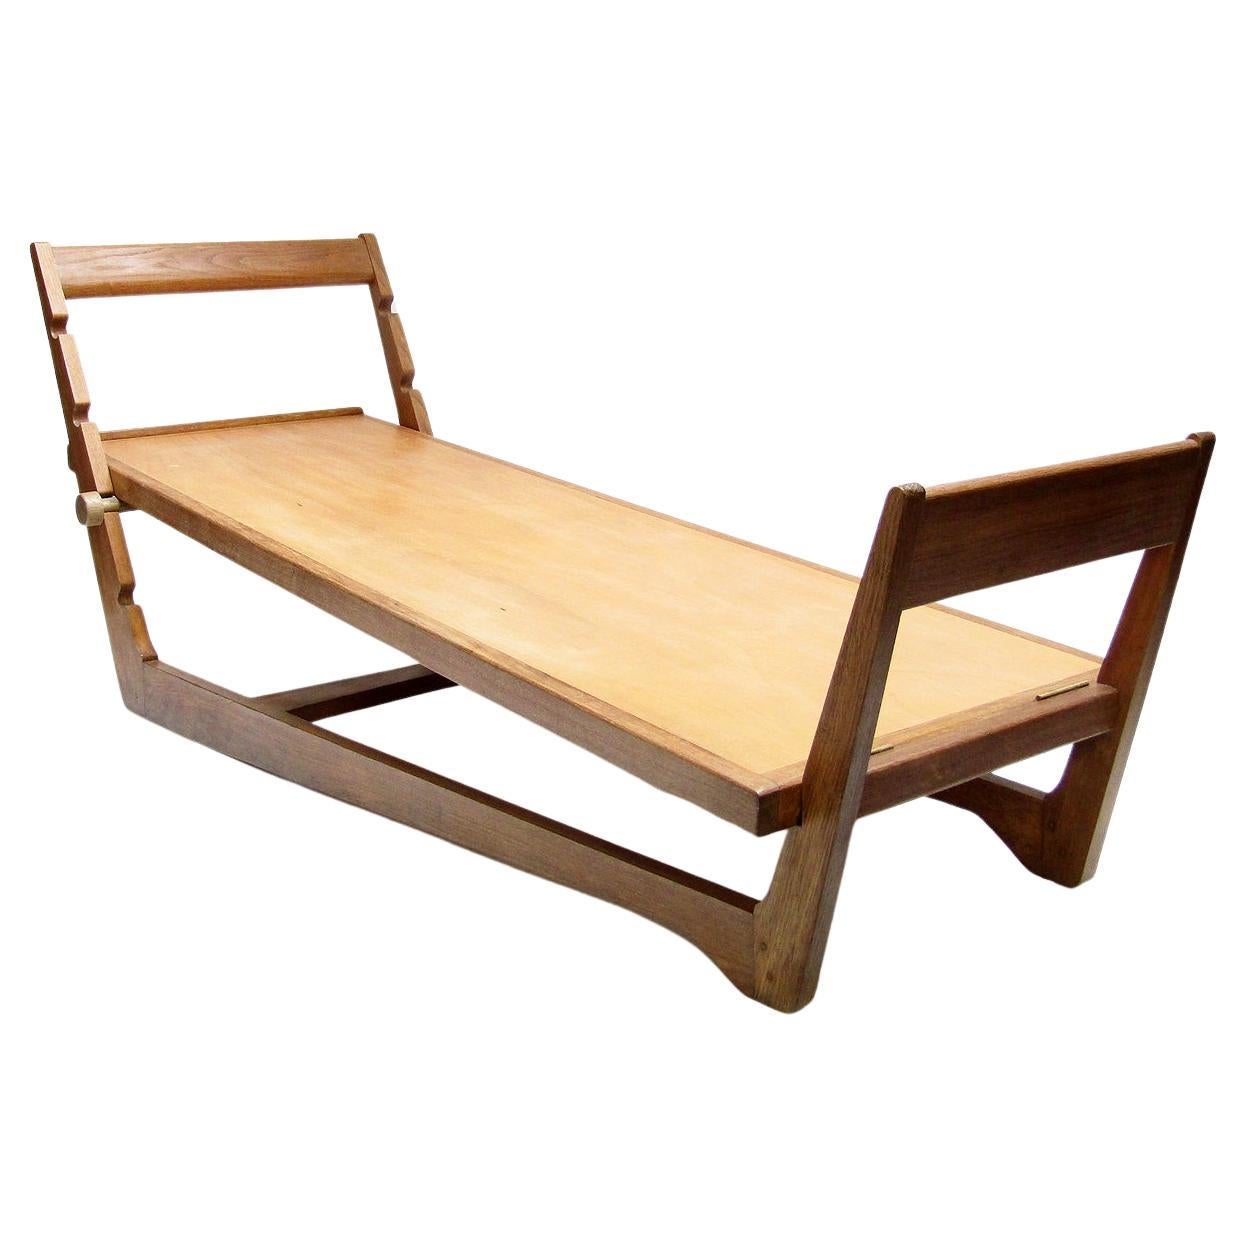 Exceptional 1950s Adjustable Daybed in Oak by Maurice Pre, France